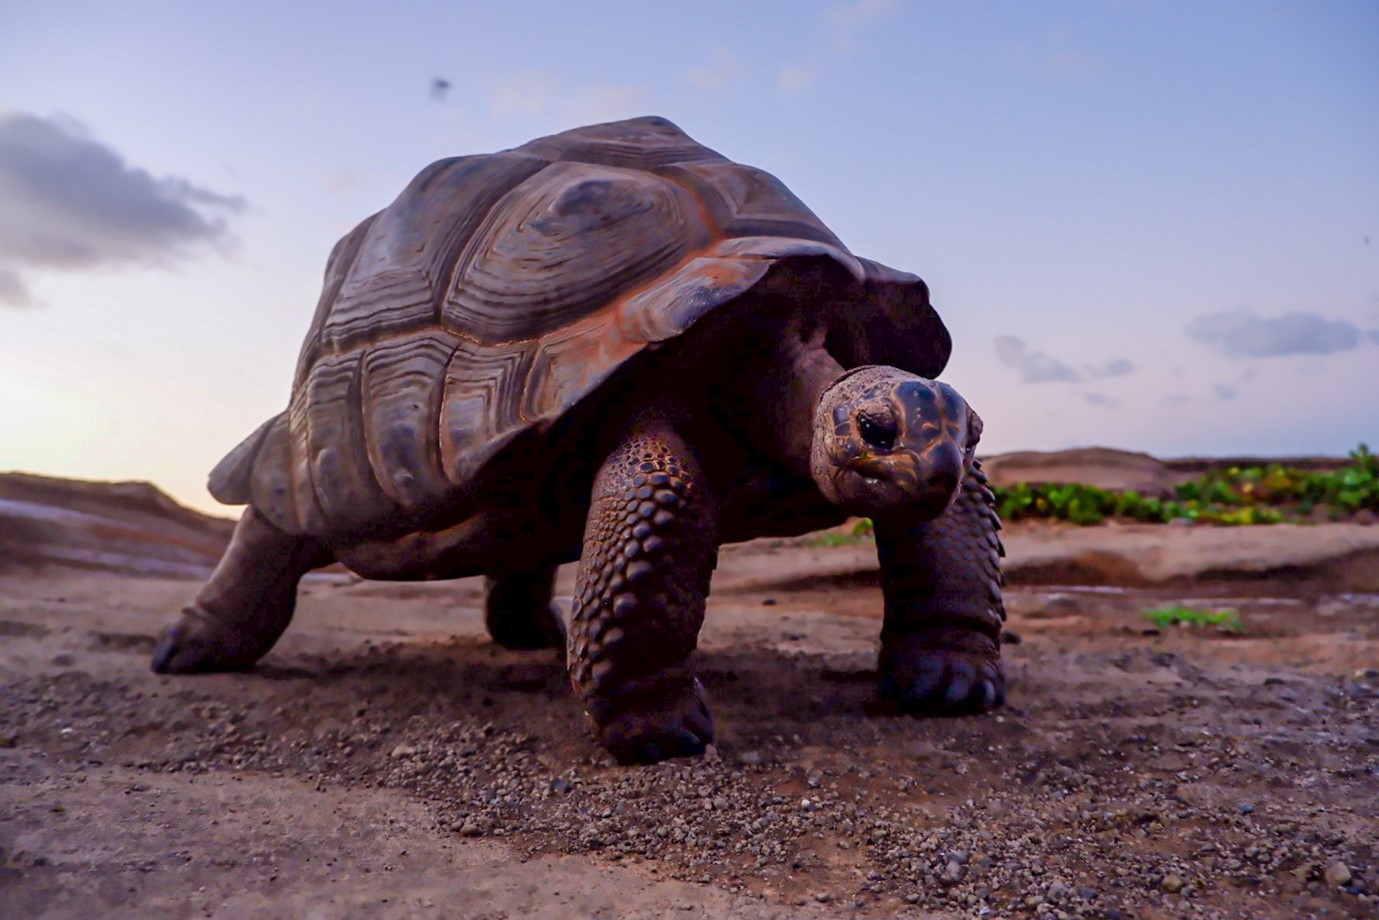 Photo of a large tortoise stamping across gravel